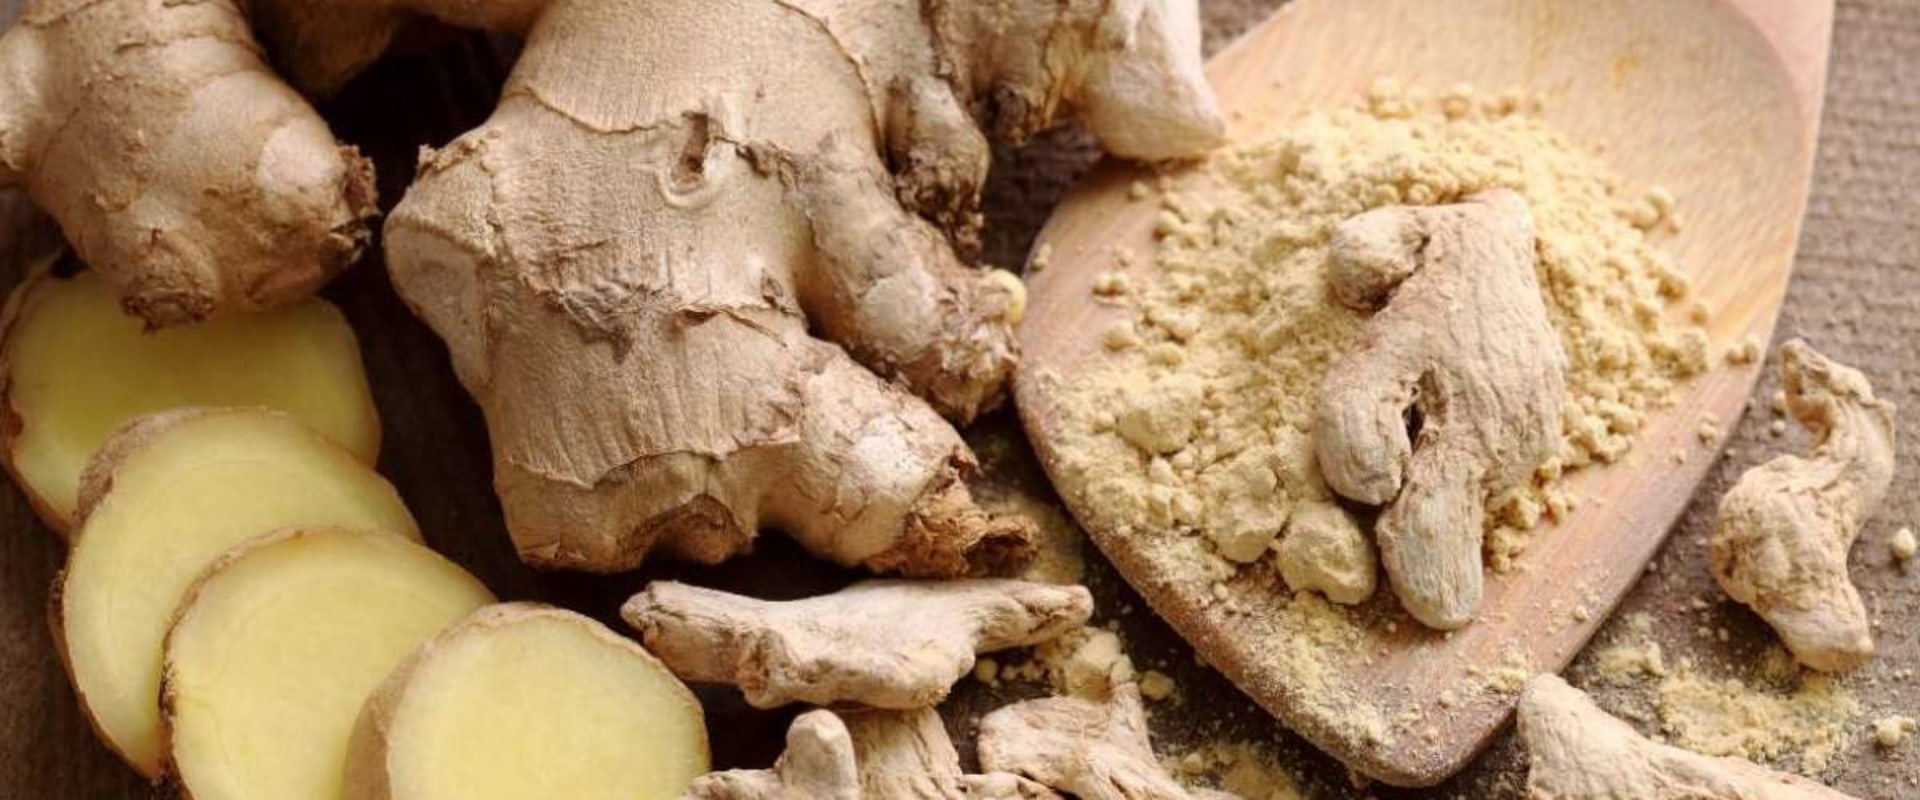 Is 1000 mg of Ginger Safe? An Expert's Perspective